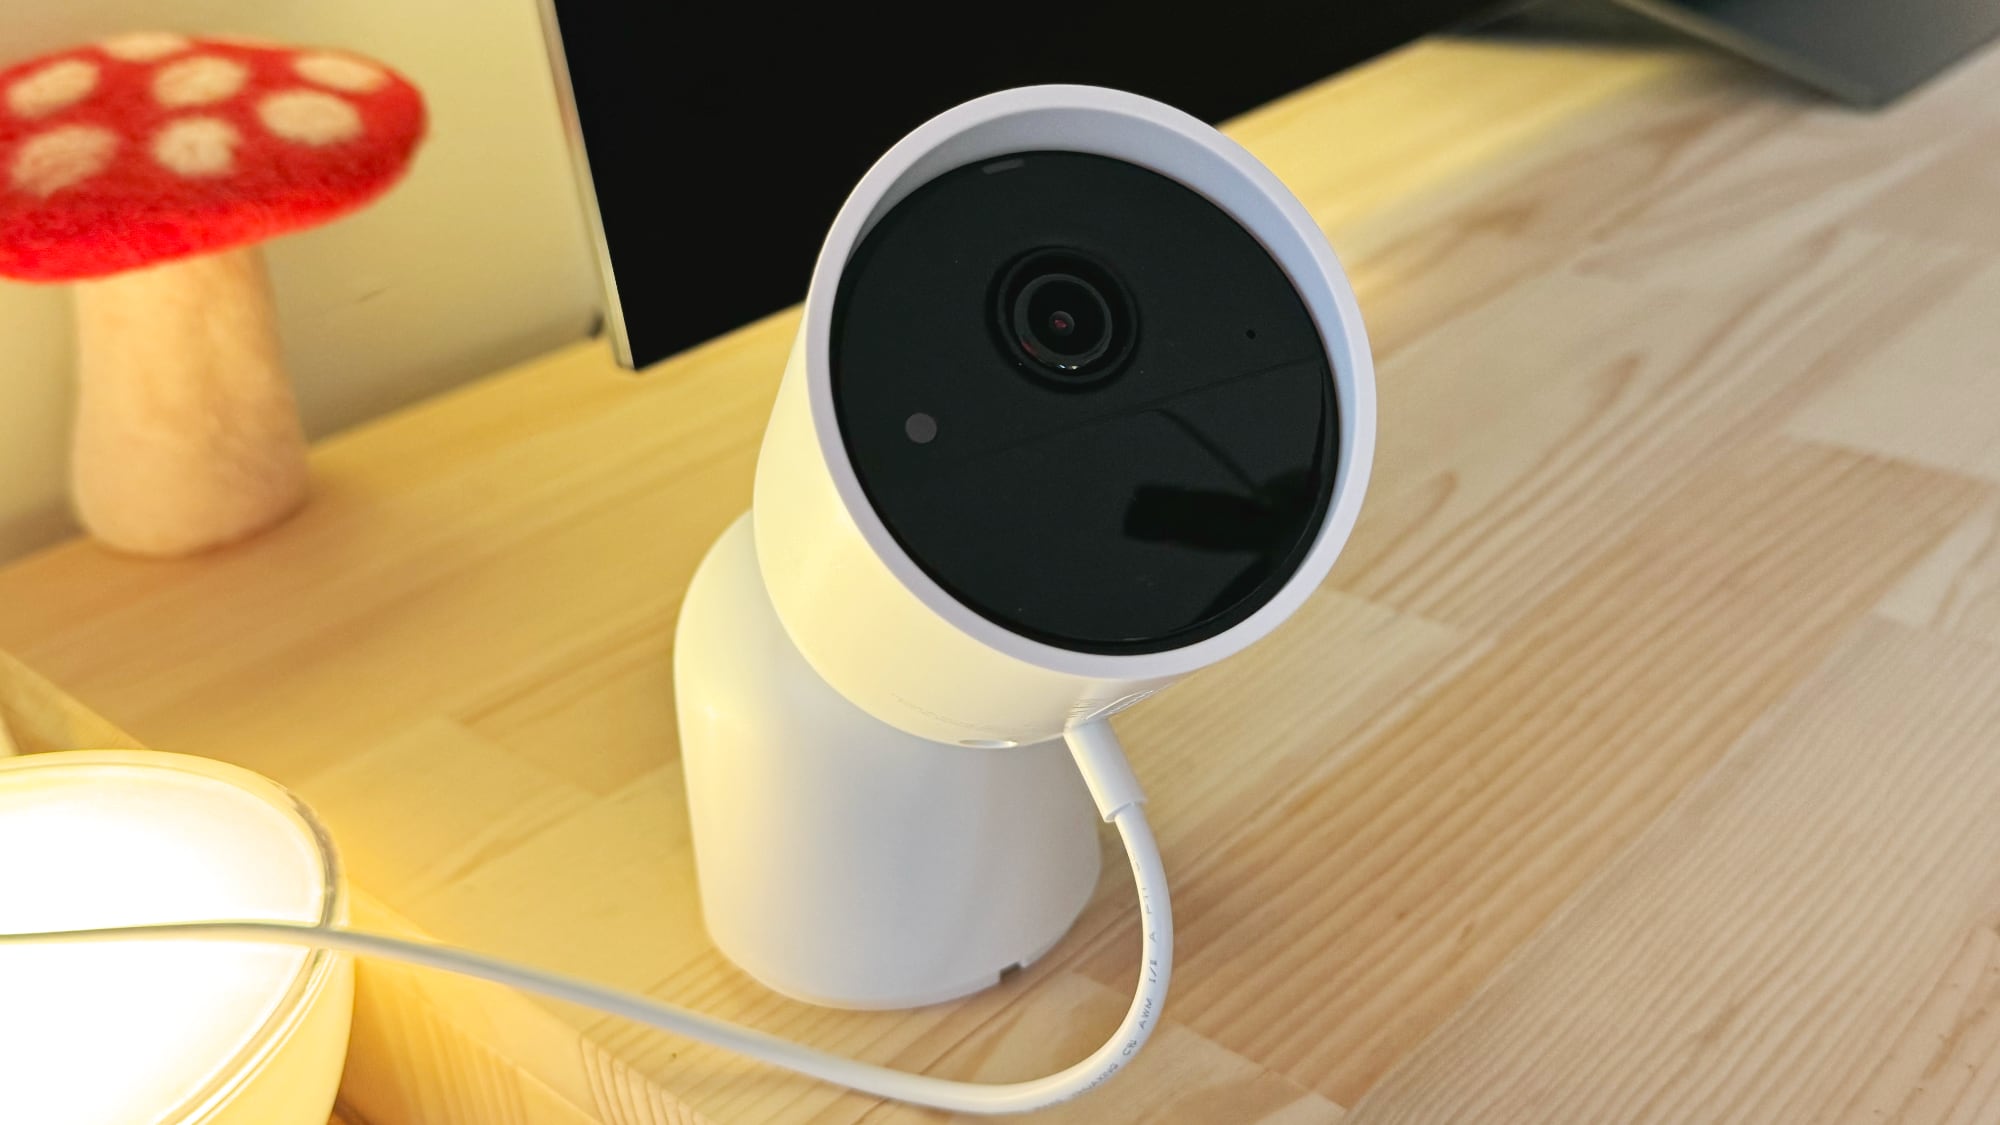 Philips Hue planning first smart home cameras, HomeKit support unknown -  9to5Mac